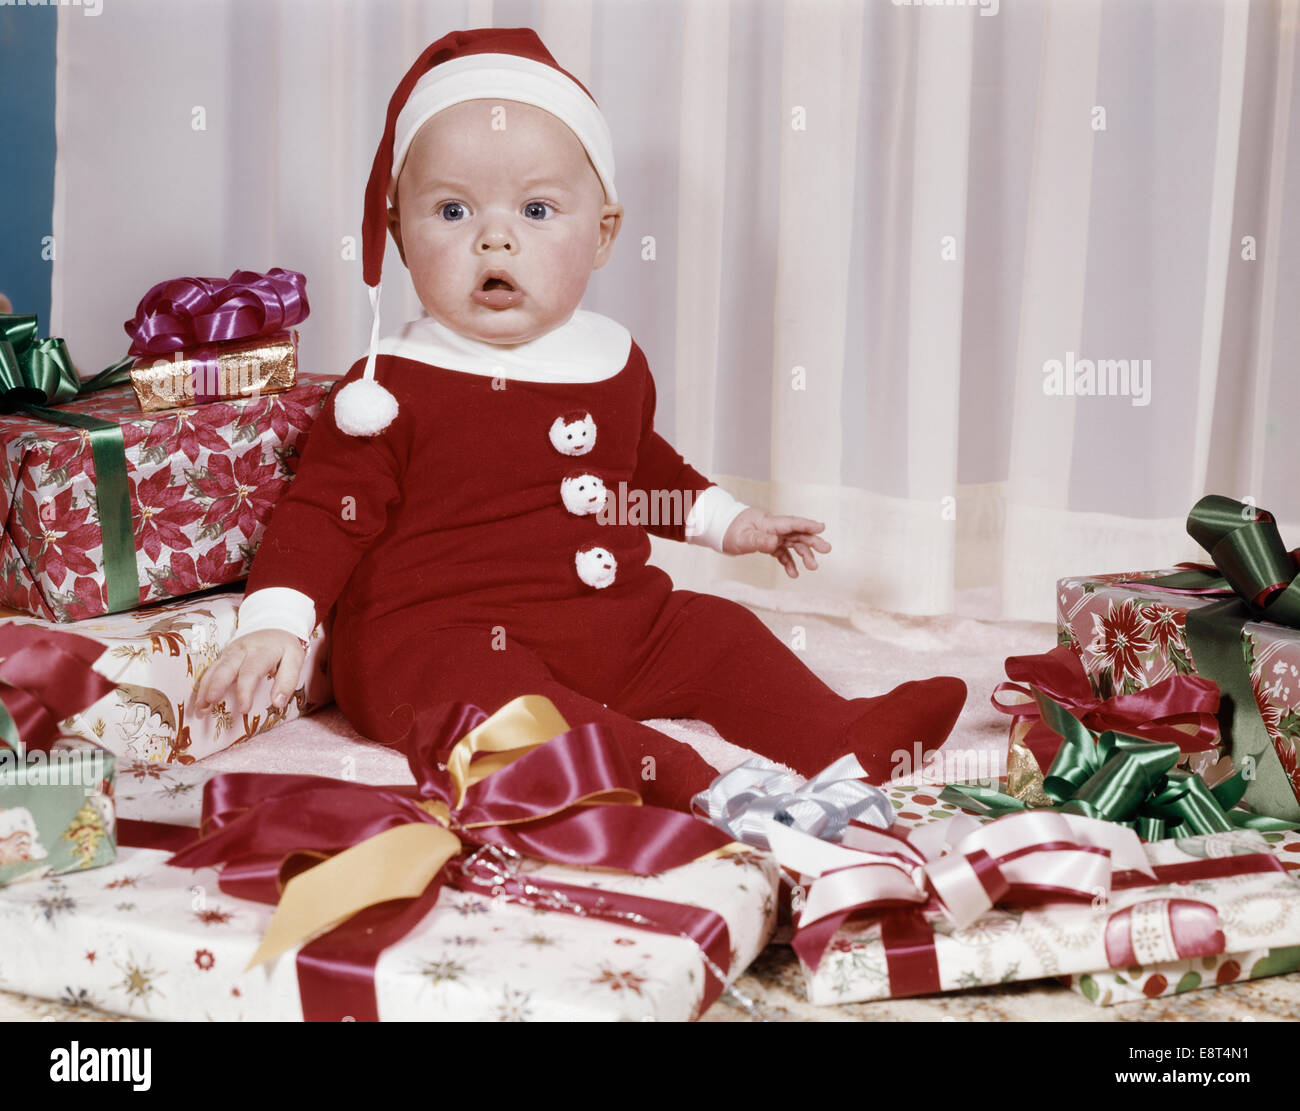 1960s AMAZED BABY IN SANTA SUIT SITTING AMONG WRAPPED PRESENTS Stock Photo